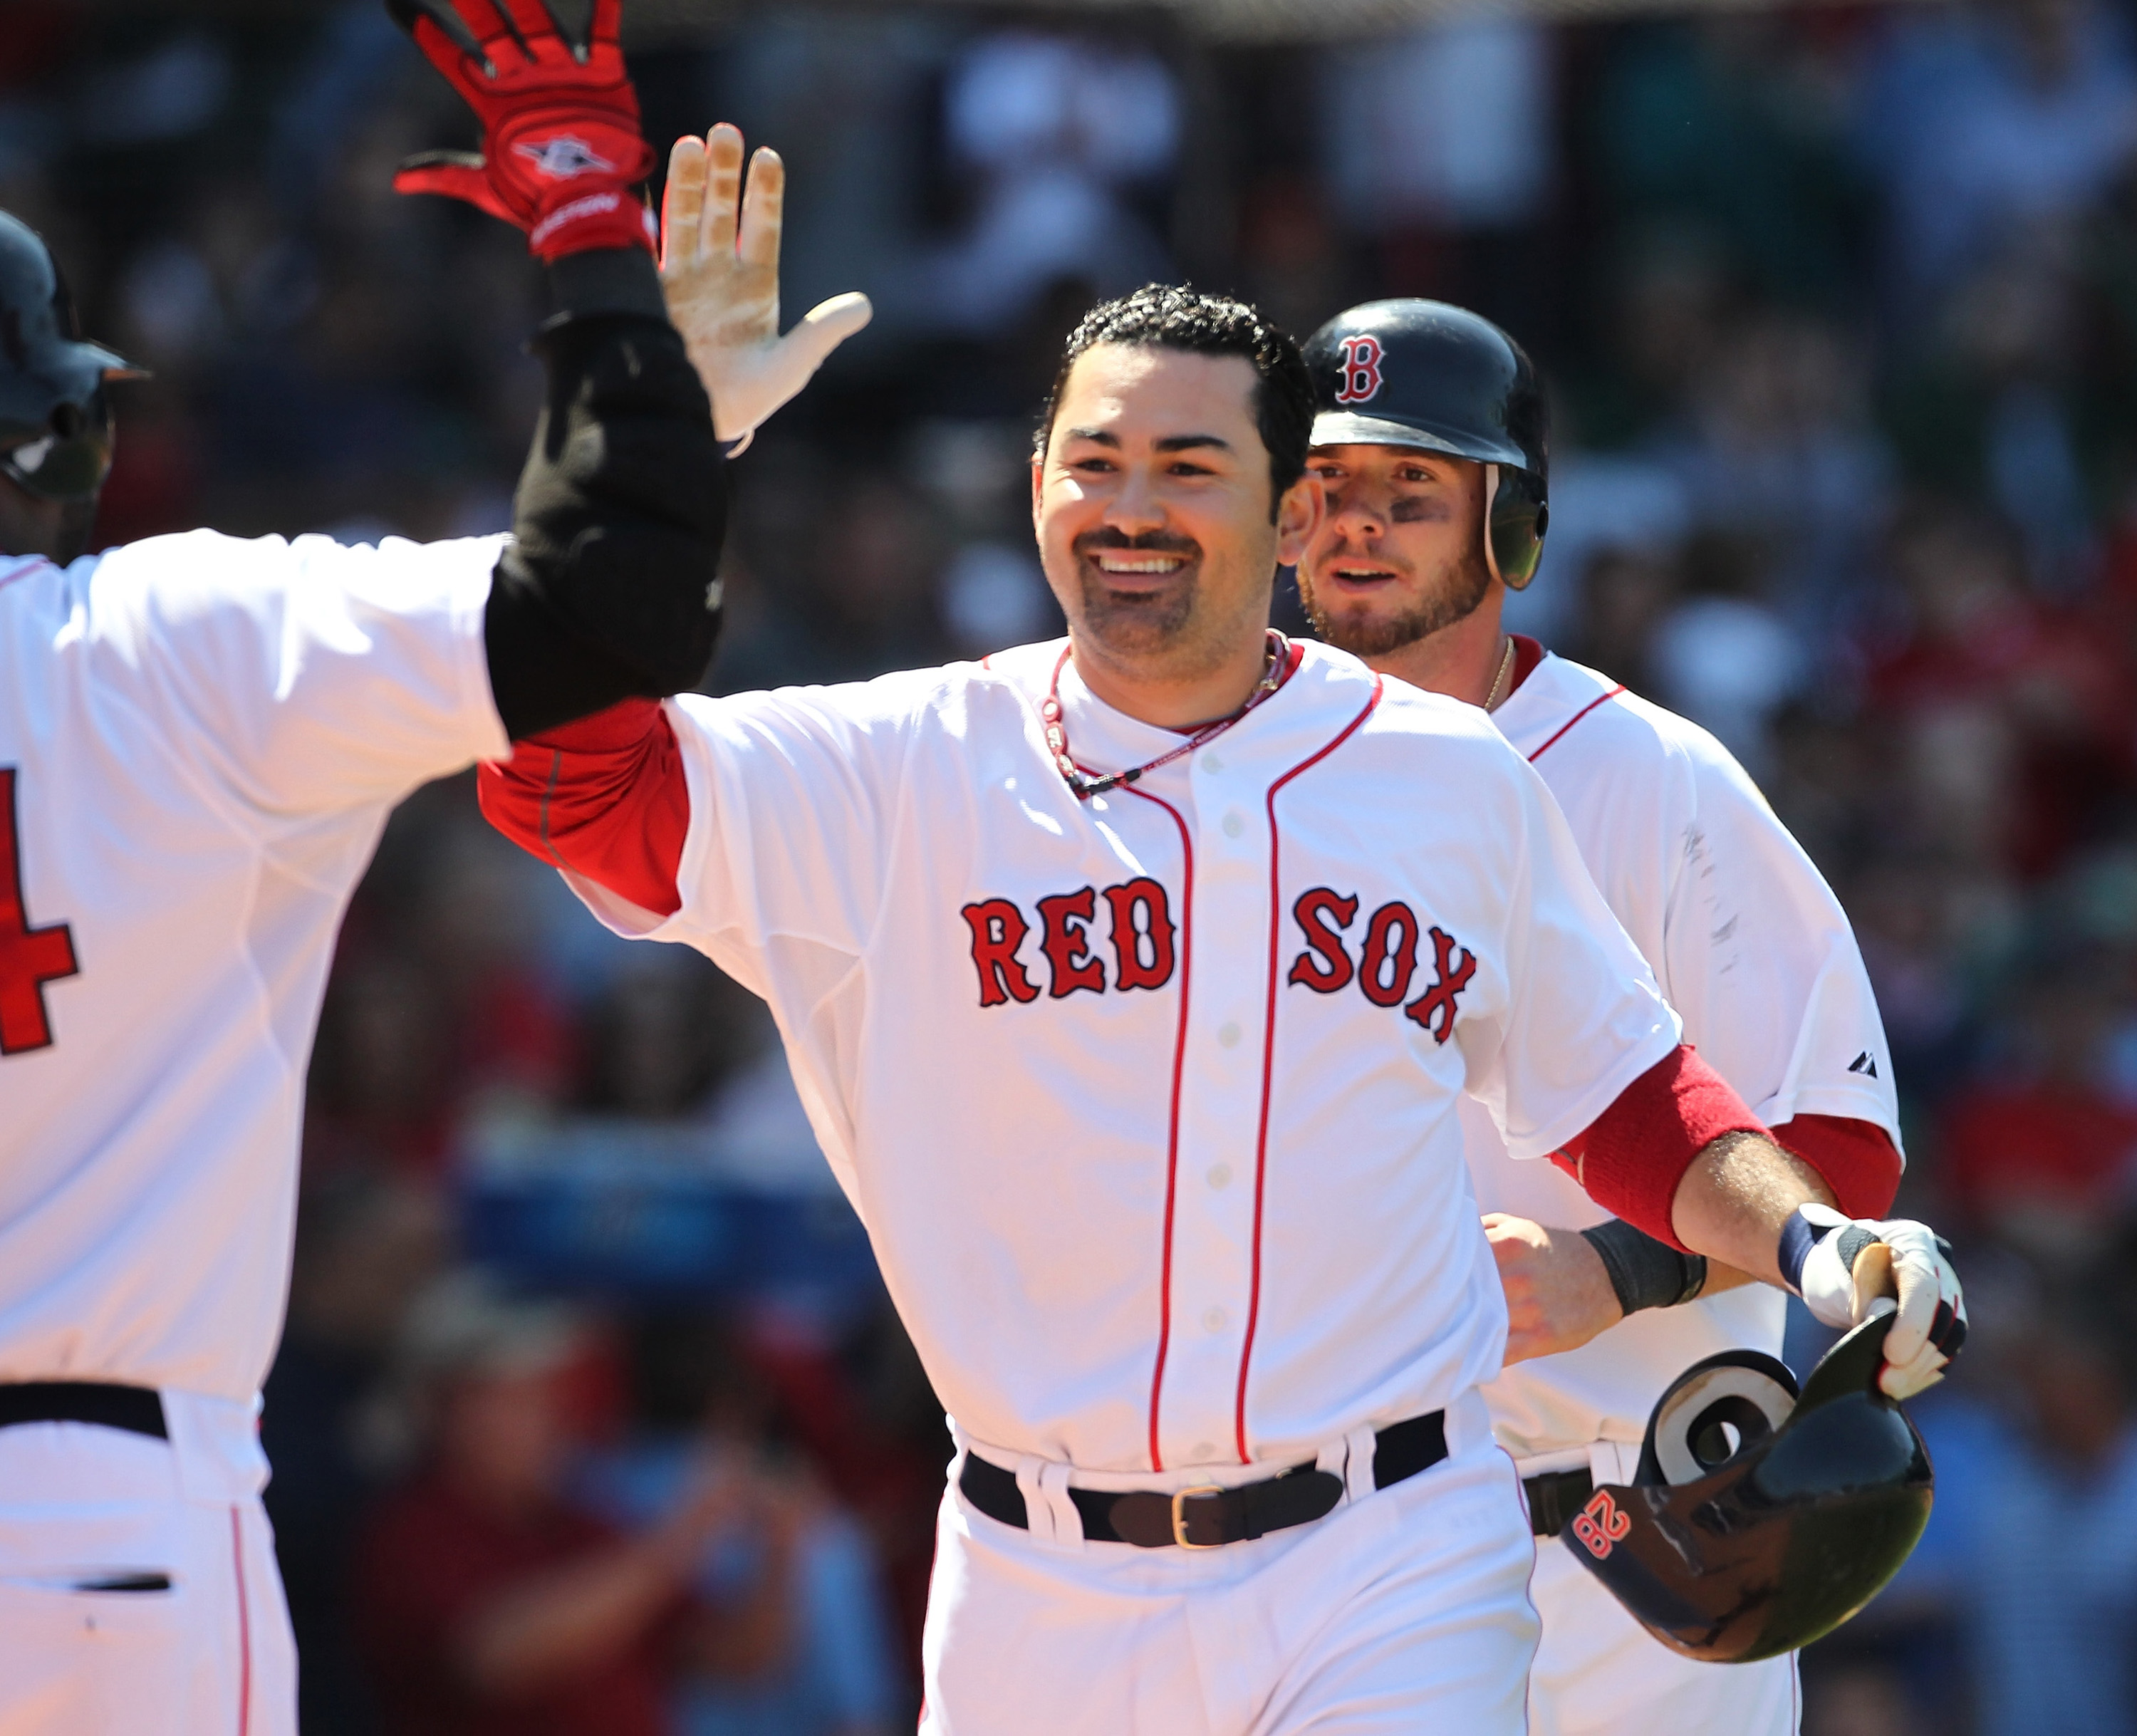 BOSTON, MA - JUNE 5:  Adrian Gonzalez #28 of the Boston Red Sox celebrates after connecting for a two-run home against the Oakland Athletics at Fenway Park on June 5, 2011 in Boston, Massachusetts.  (Photo by Jim Rogash/Getty Images)